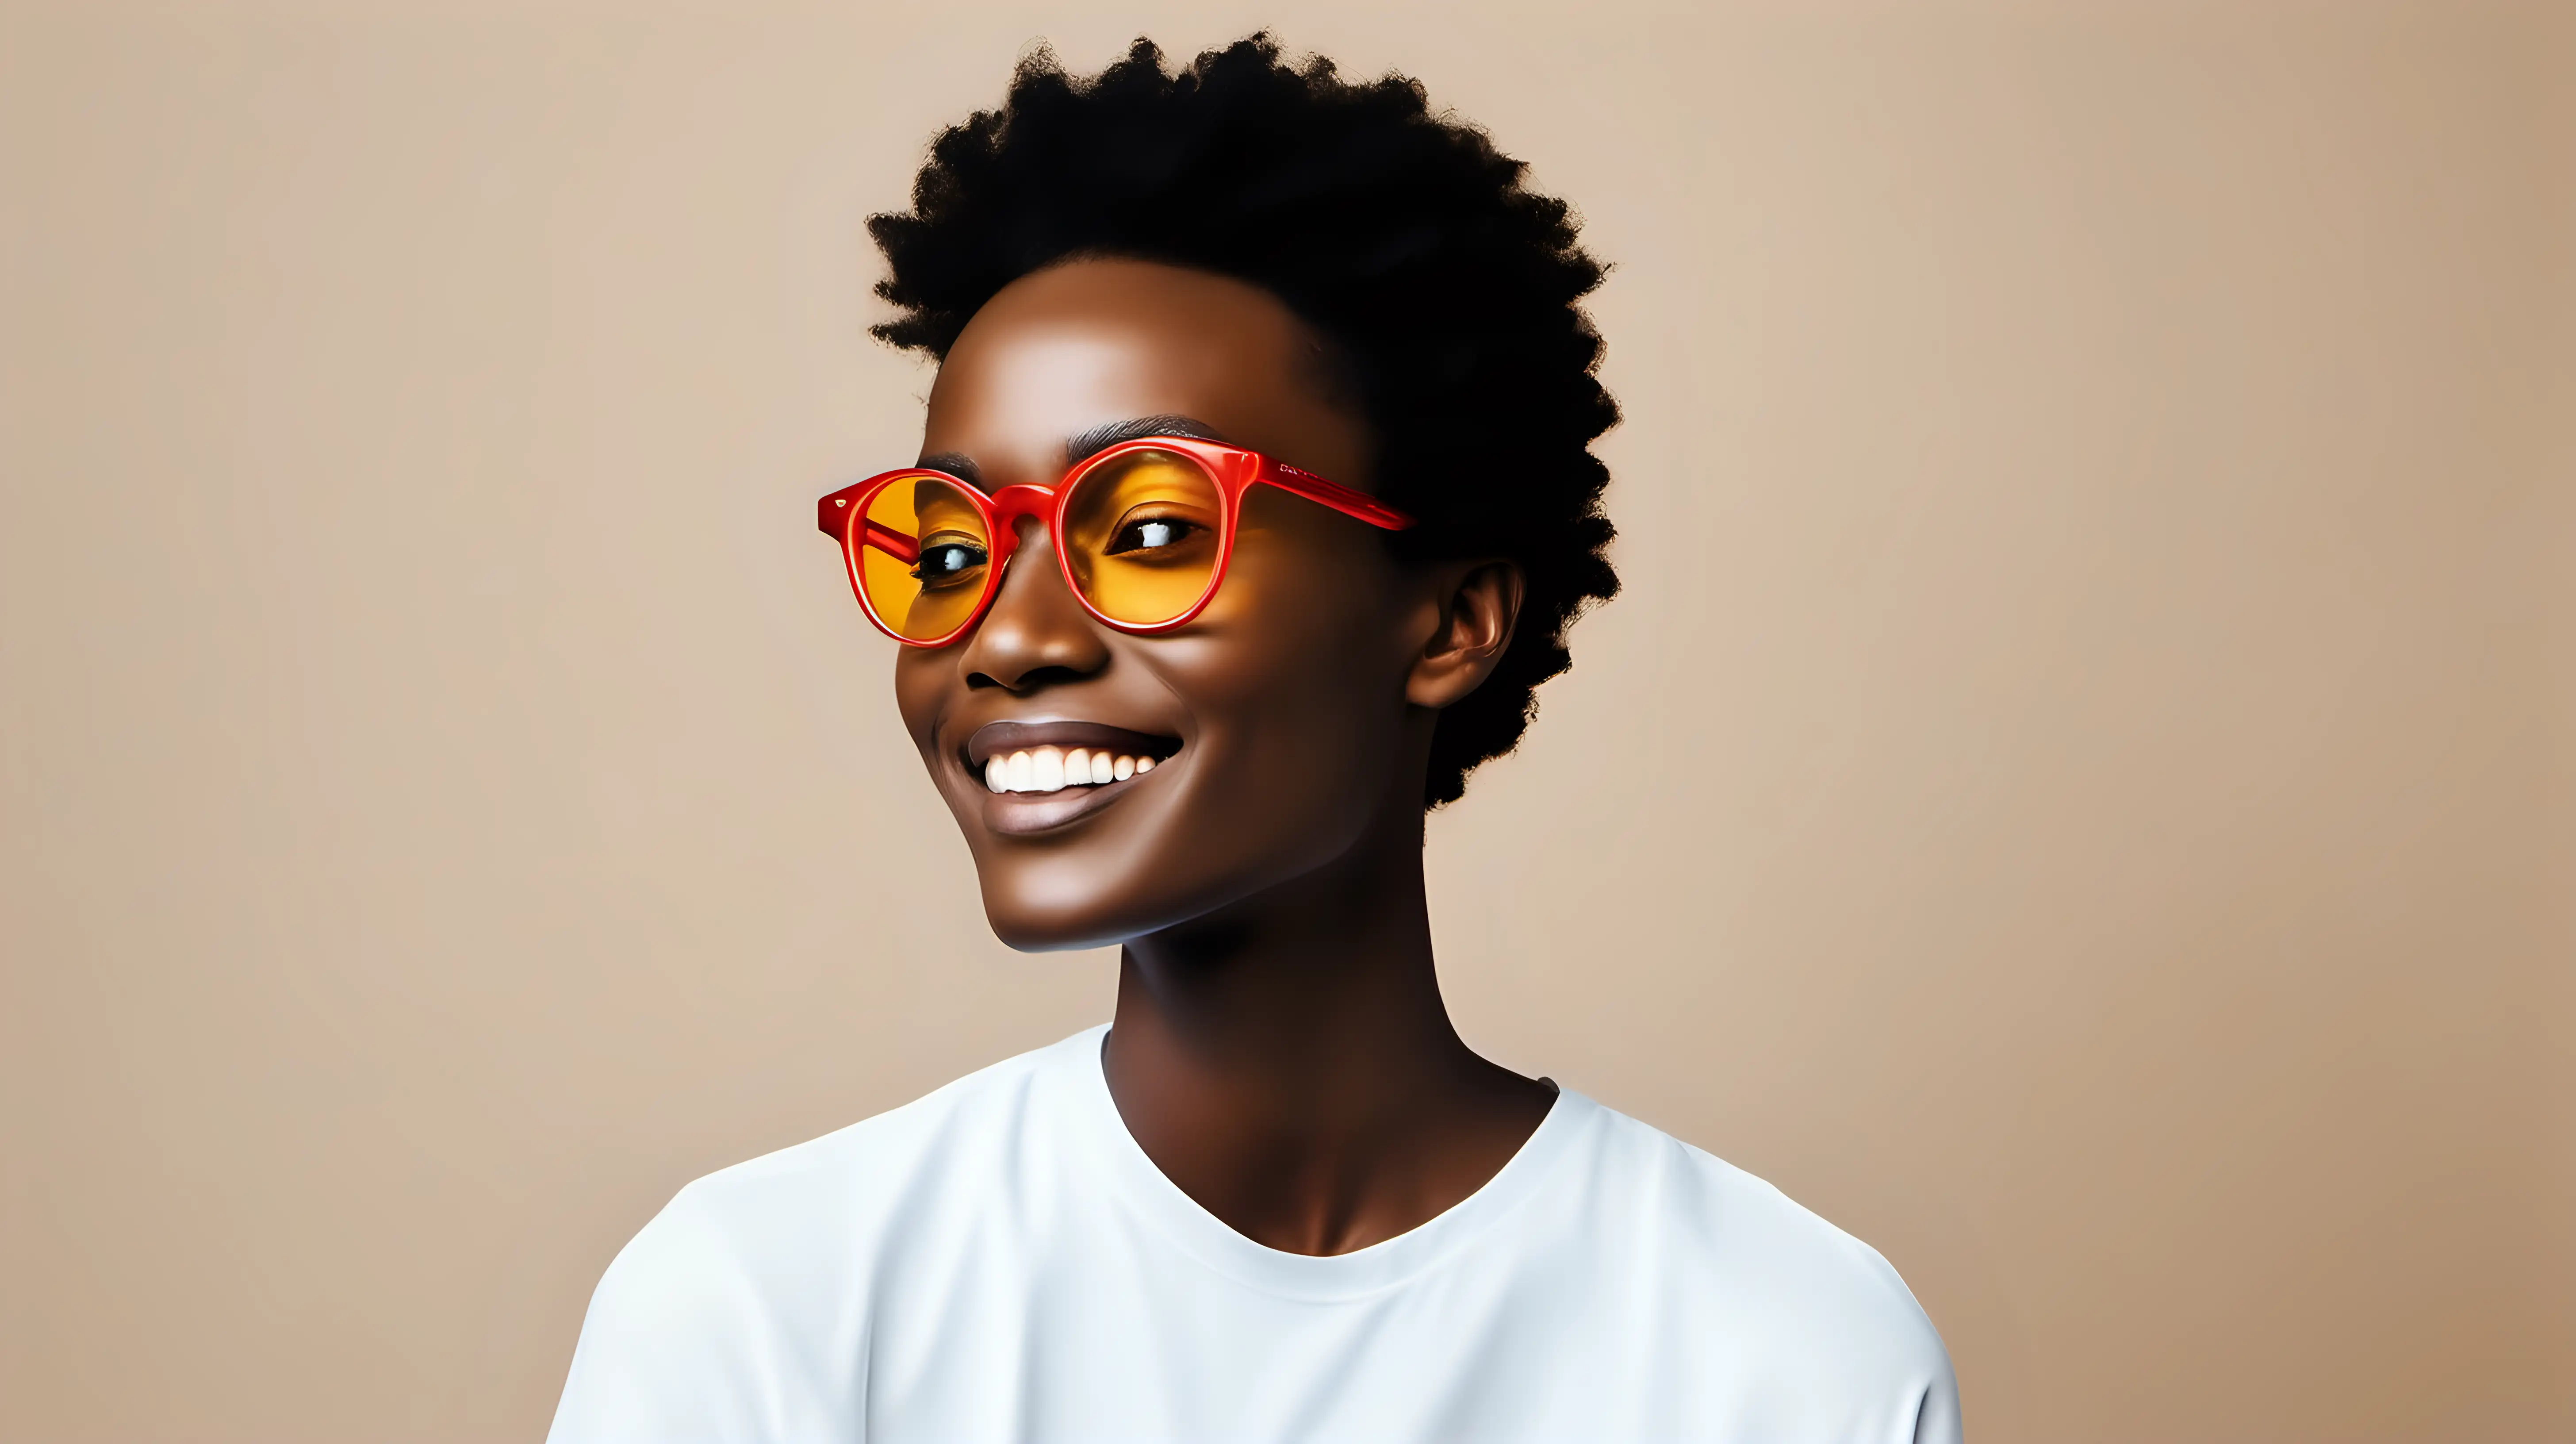 Confident Expression with Vibrant Glasses in Minimalist Setting